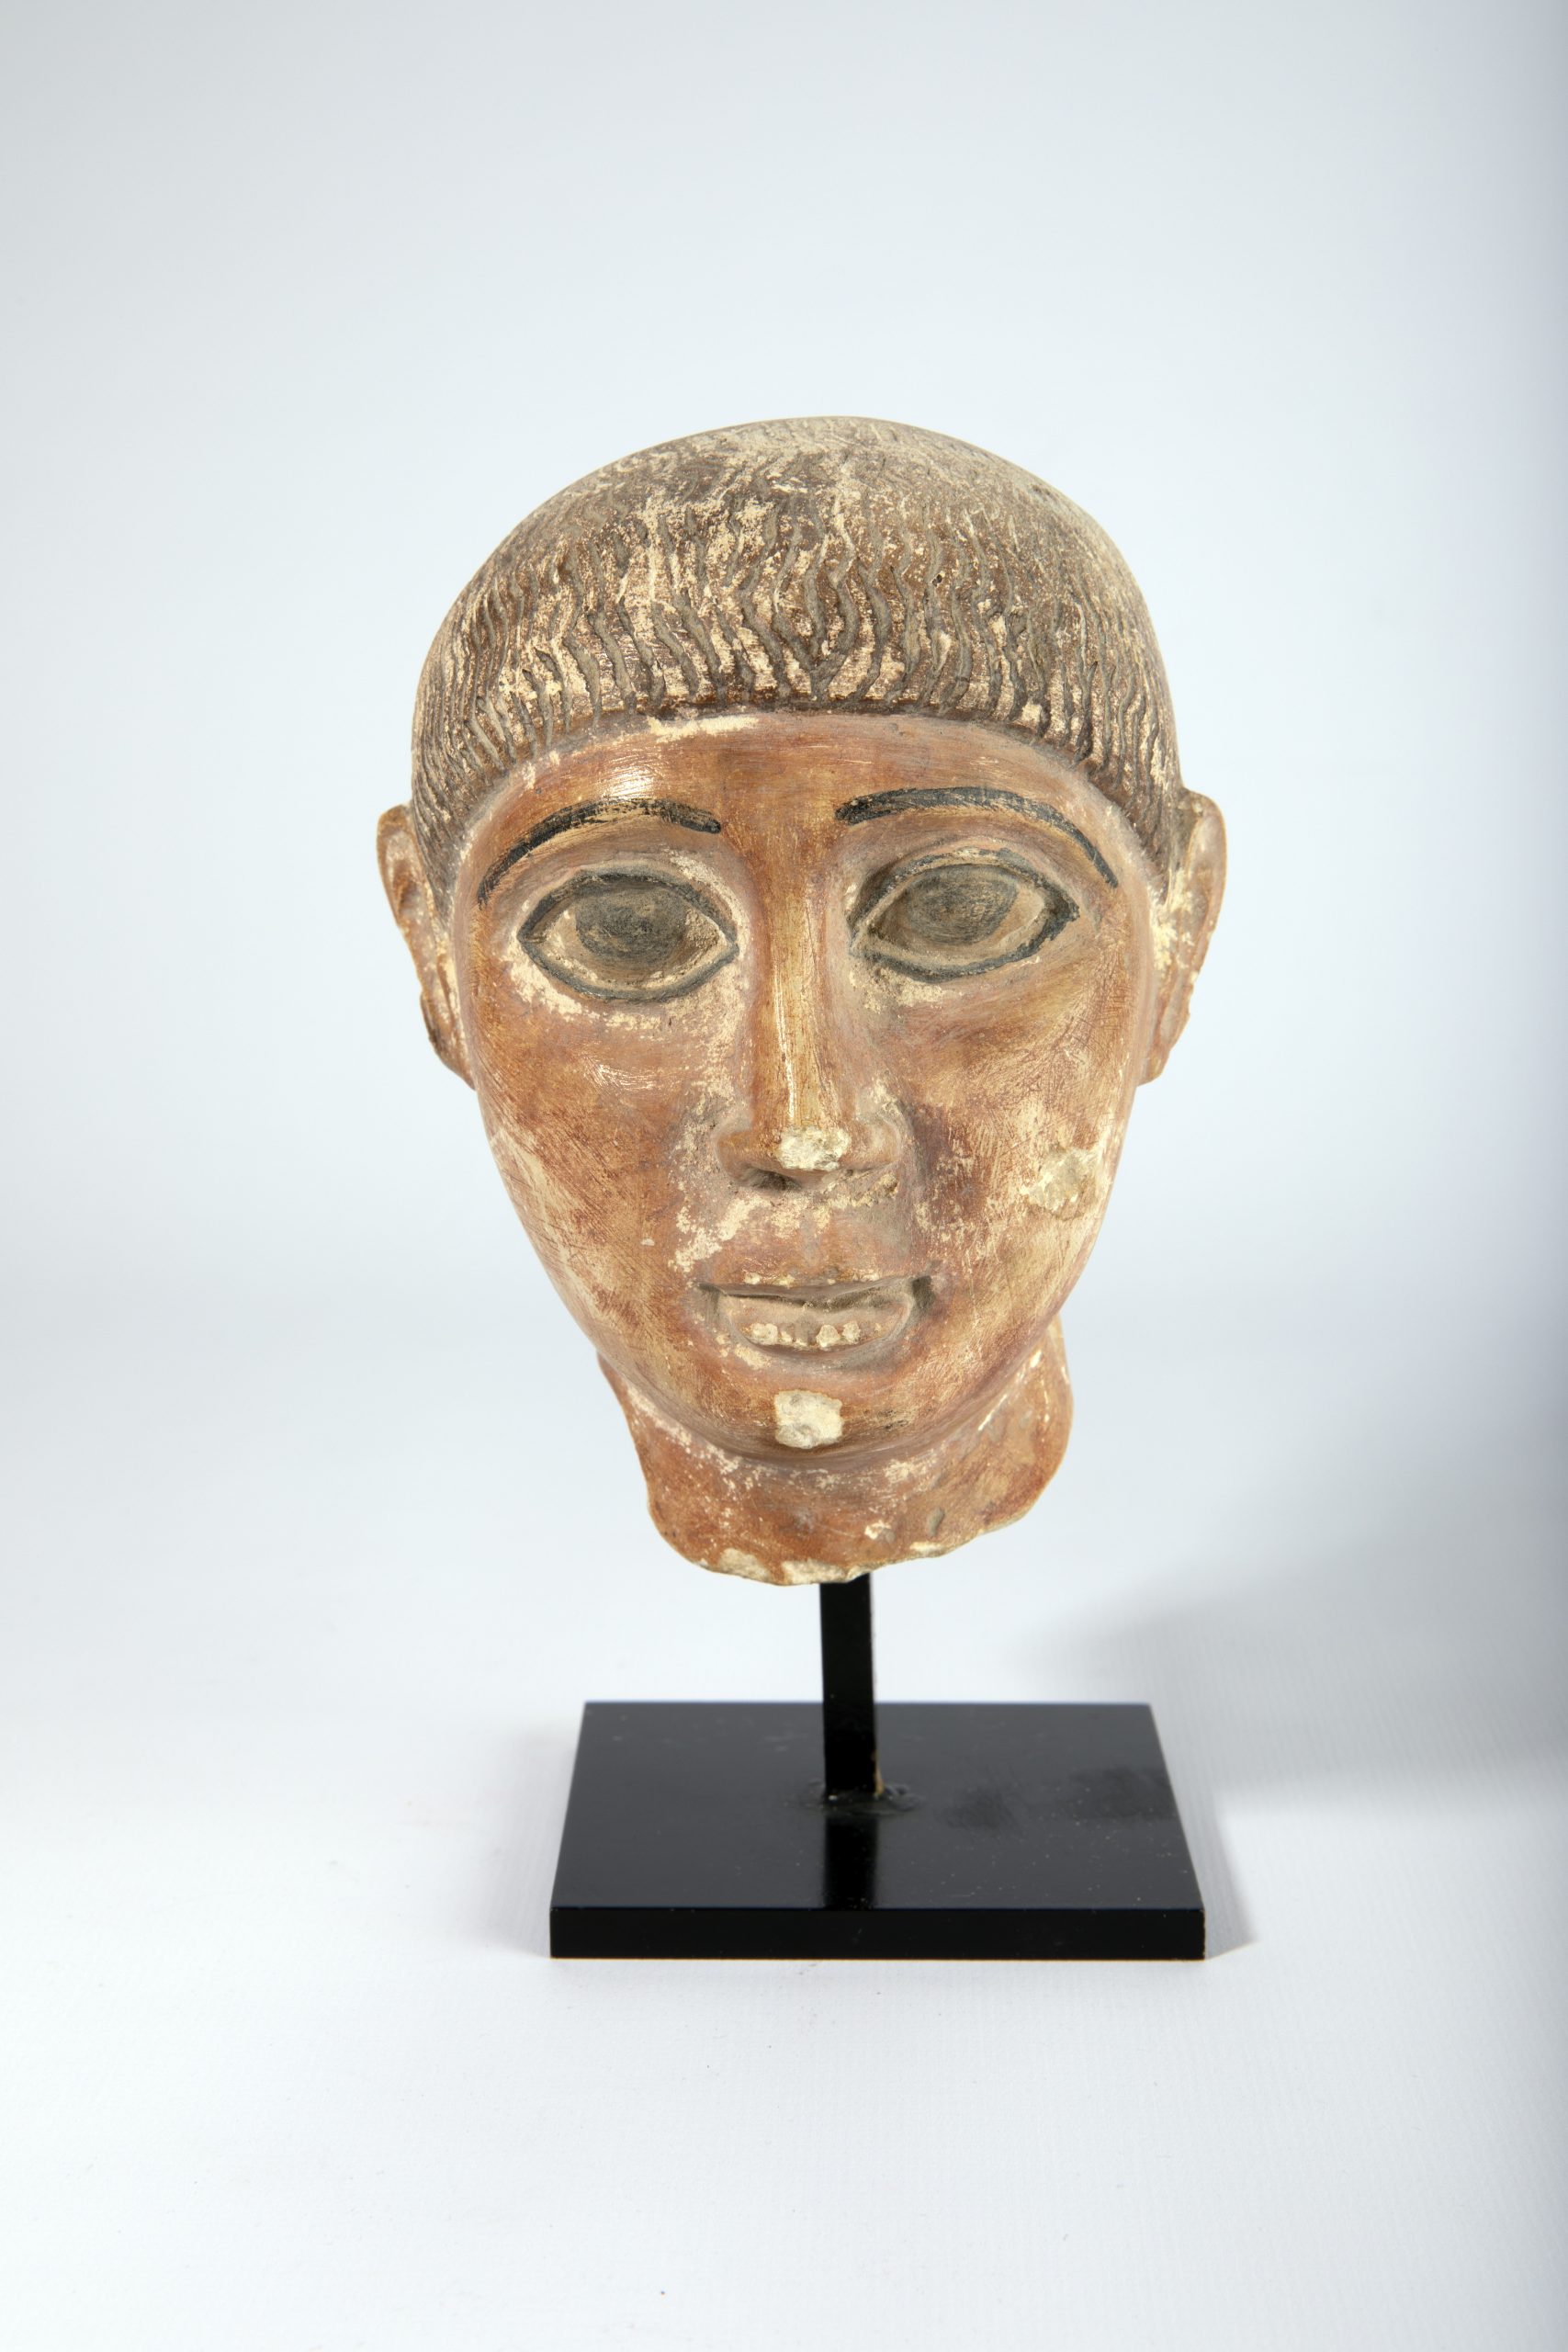 Head of a boy (funerary), Egypt (Coptic), 4–5th century CE, Limestone with Polychrome, 5 ¼ x 5 x 5 ¼ inches, 1979.1012P